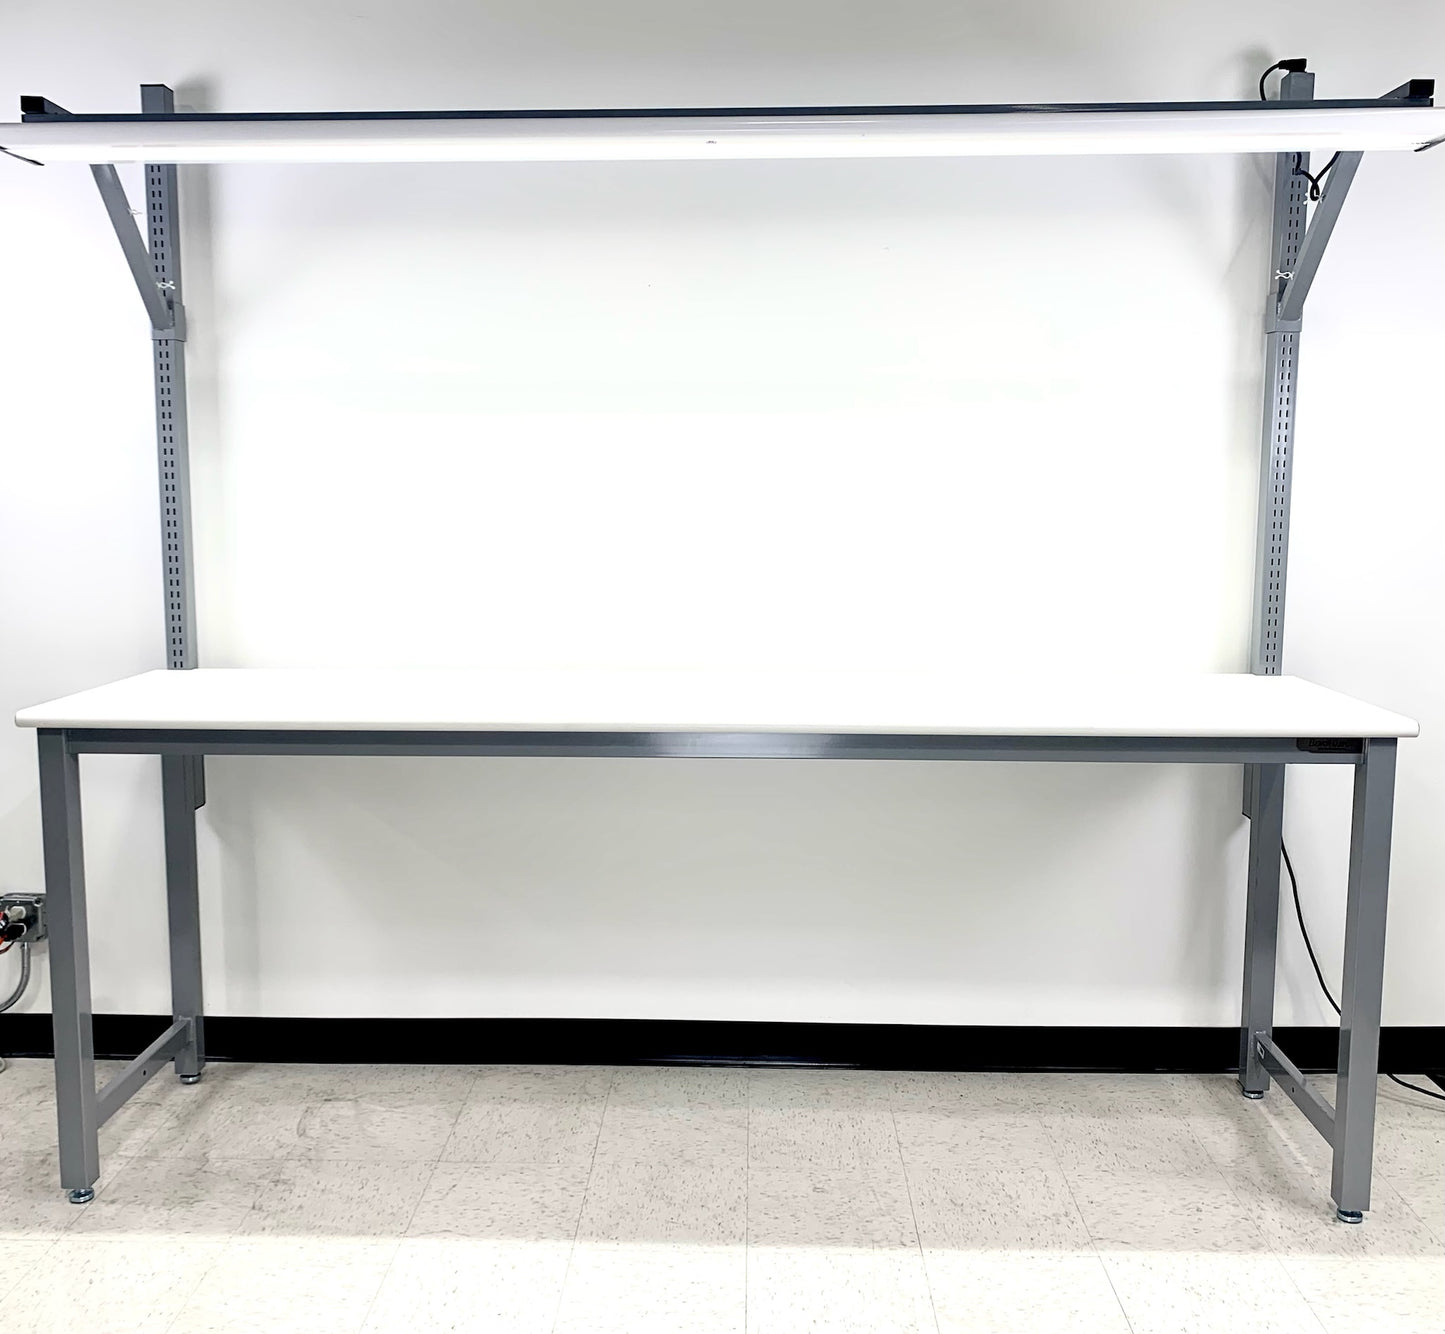 LAB TABLE W/ LIGHT FIXTURE, GREY BASE WHITE TOP